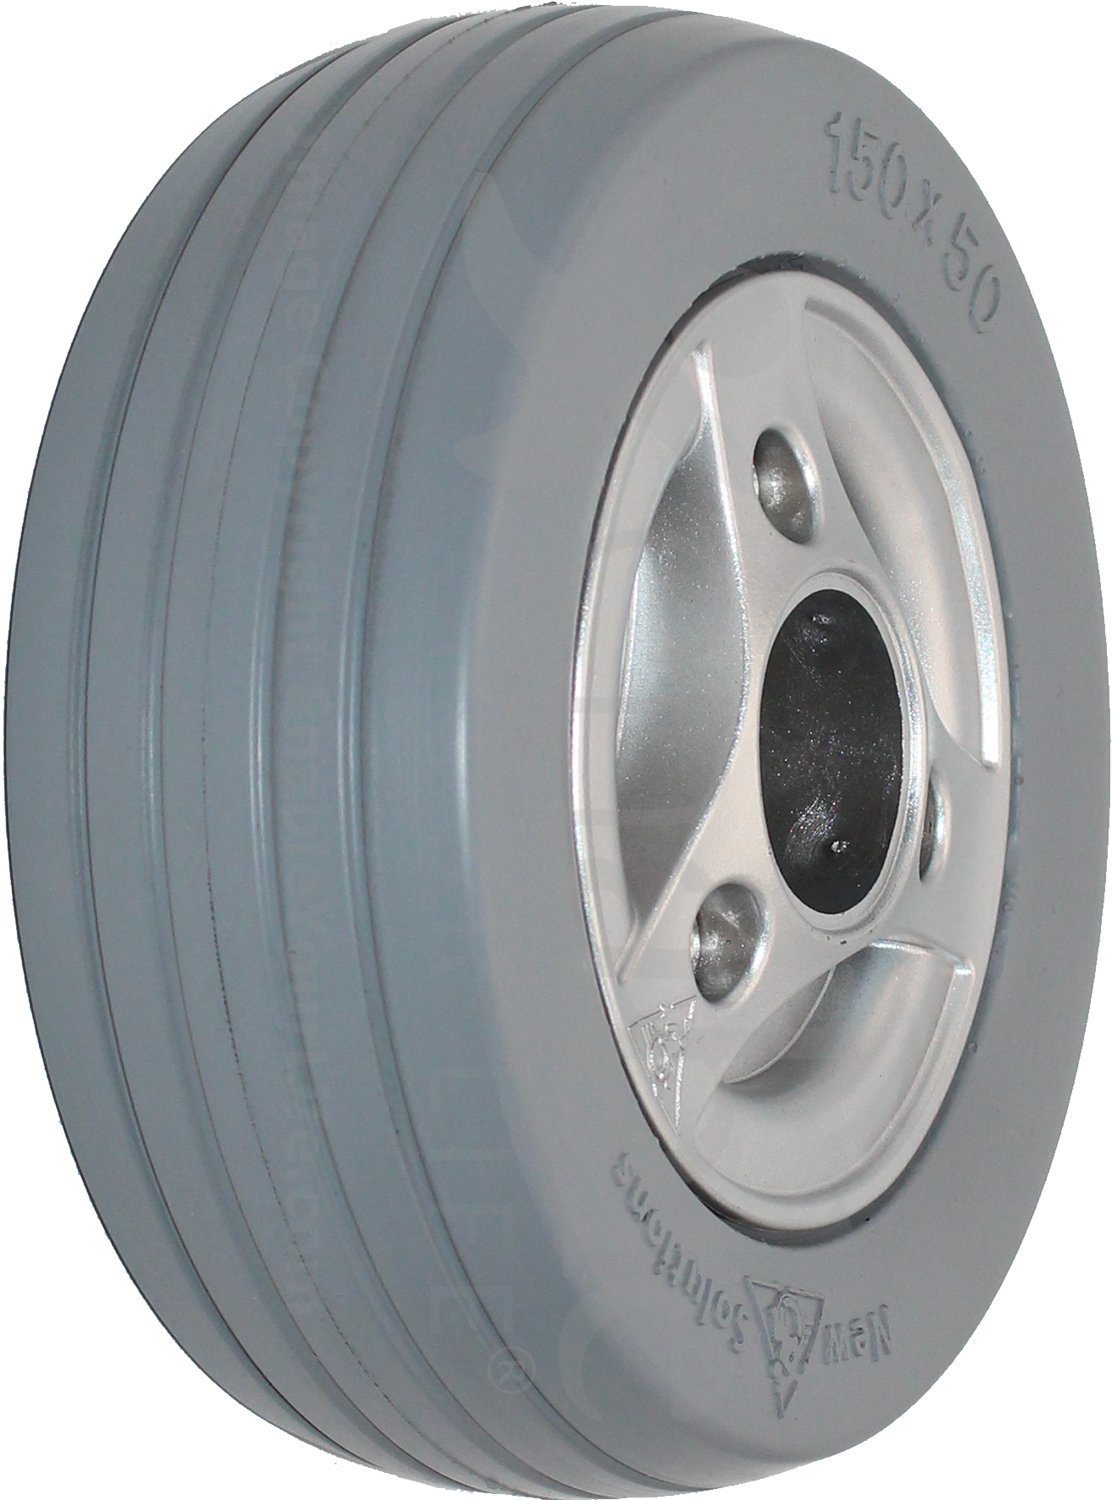 6 x 2 in. (150 x 50) Permobil M300 and M400 Replacement Wheelchair Caster Wheel with Gray Tire (Compare to Permobil Part 1830337) - Angled view shown